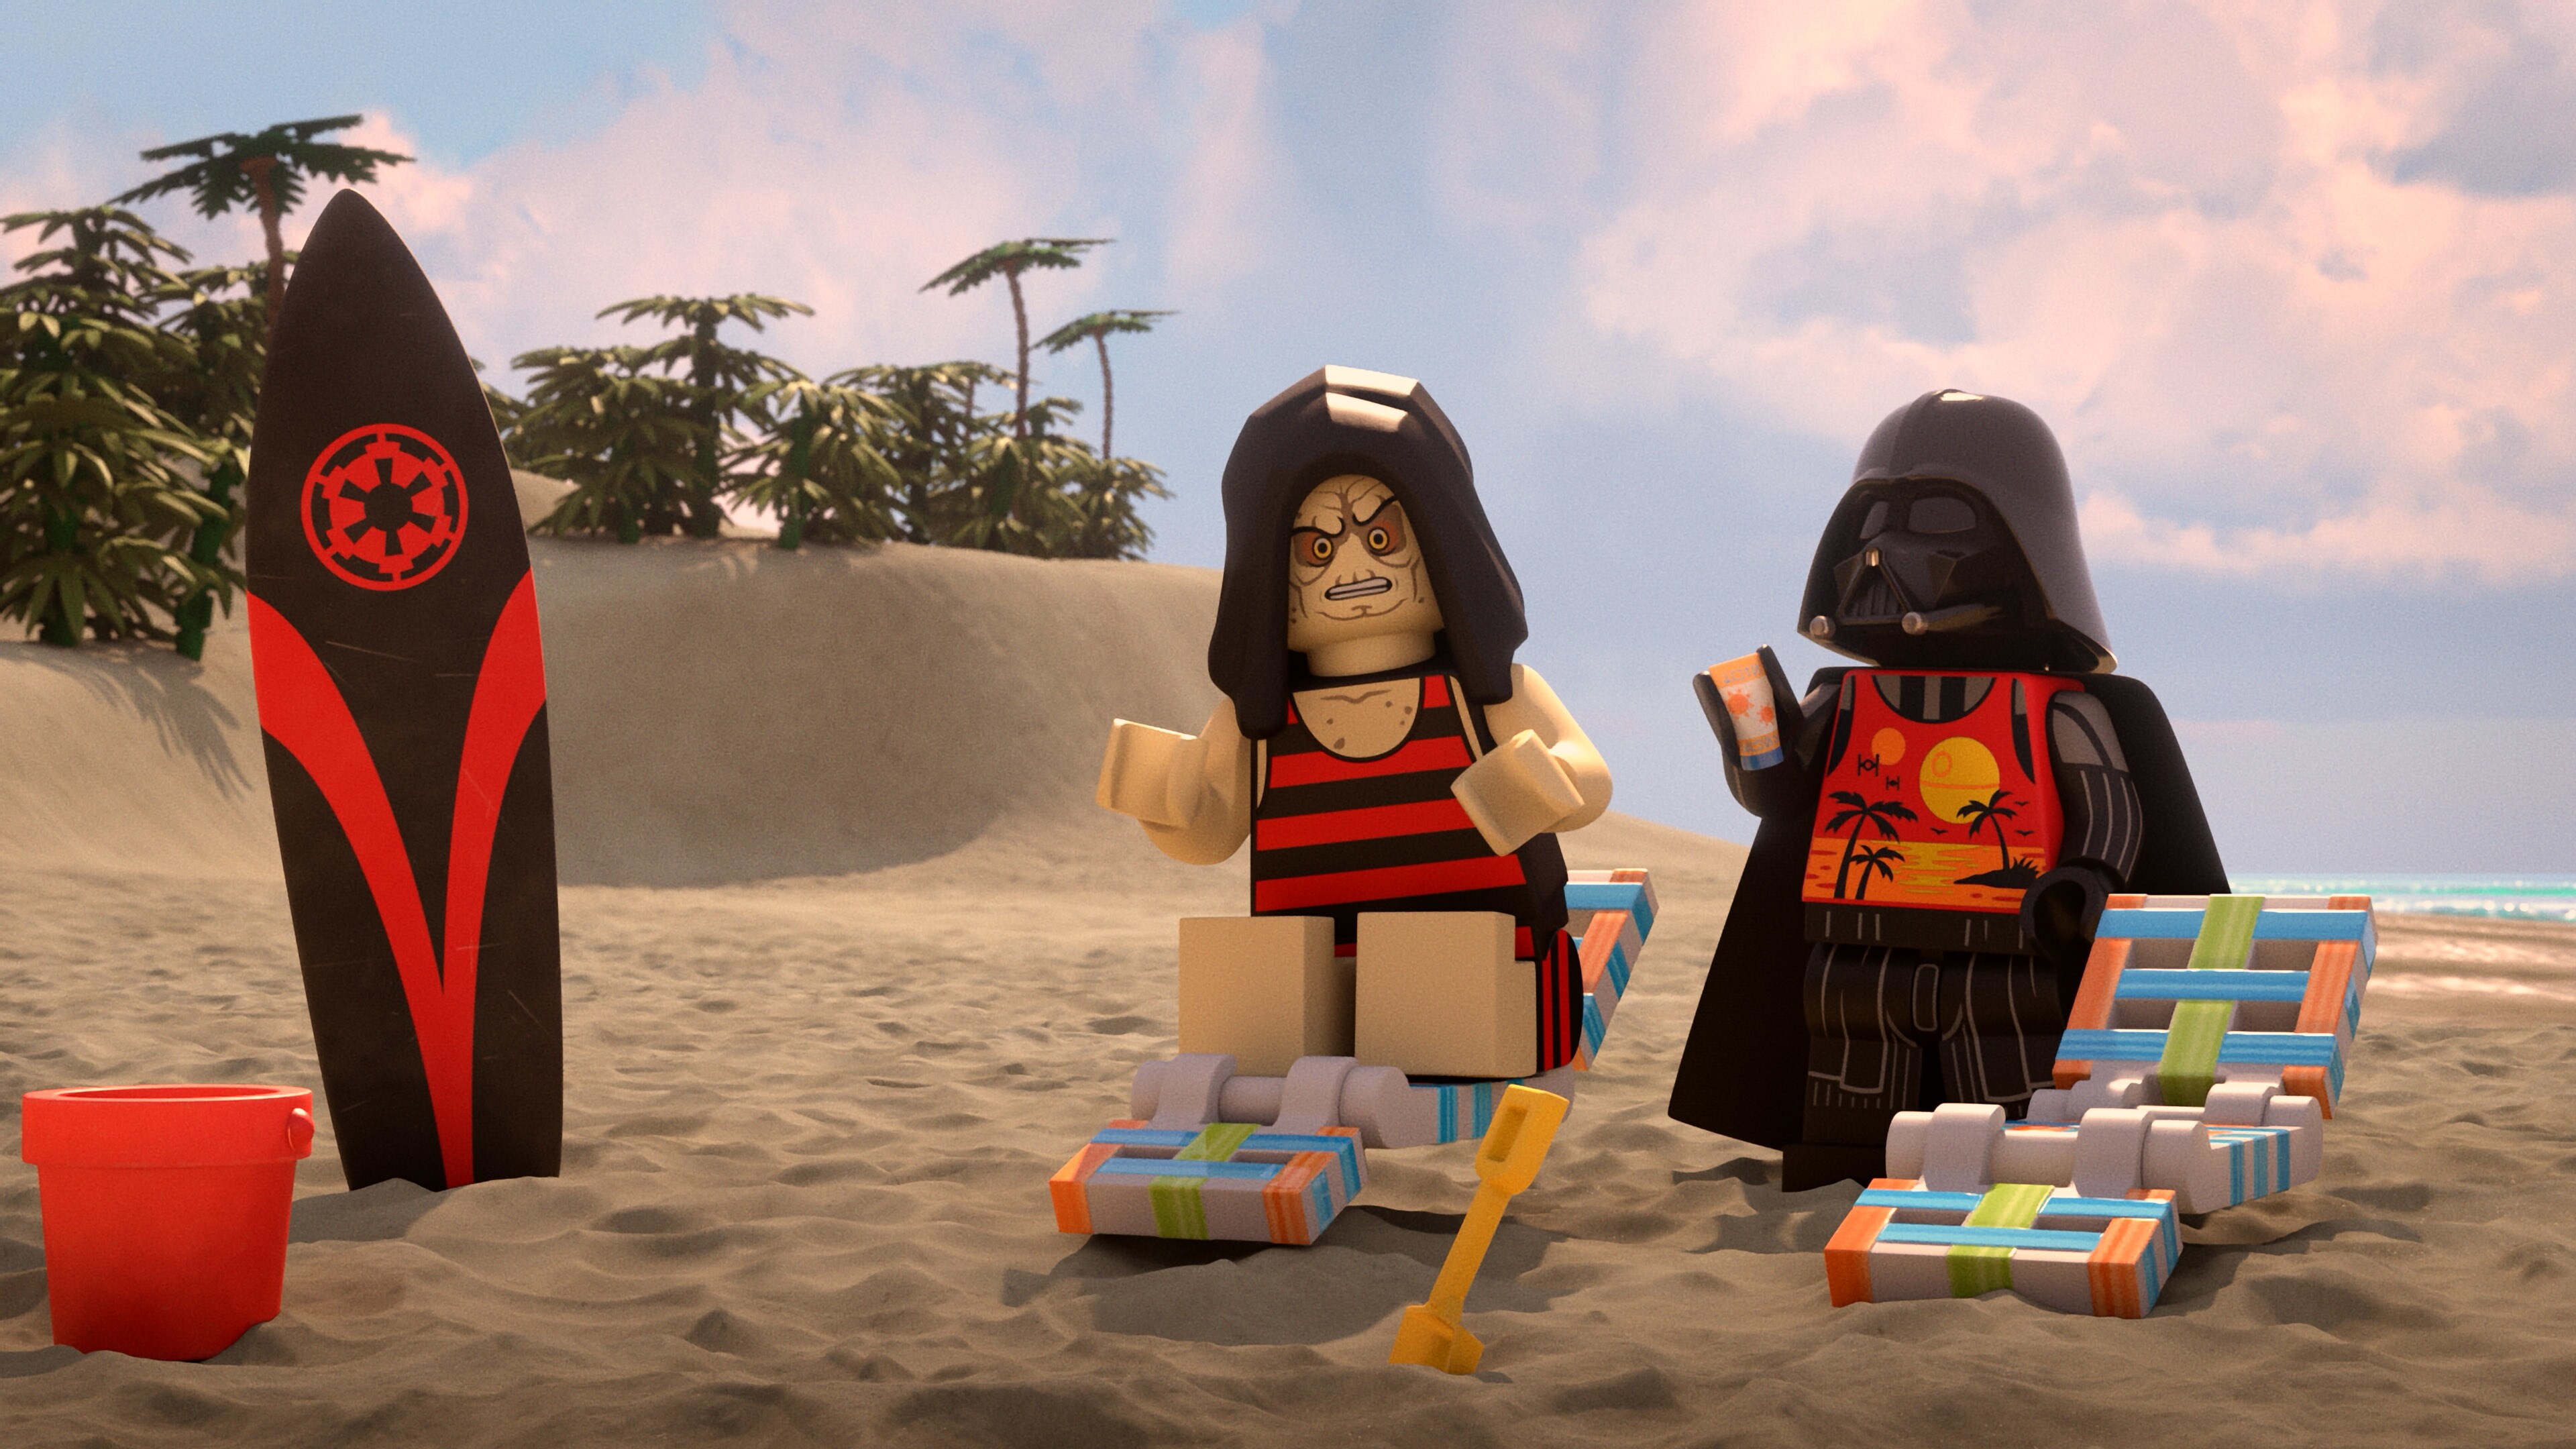 Summer Heats Up With The Arrival Of The Hot Trailer For “LEGO® Star Wars Summer Vacation,” Premiering August 5 On Disney+